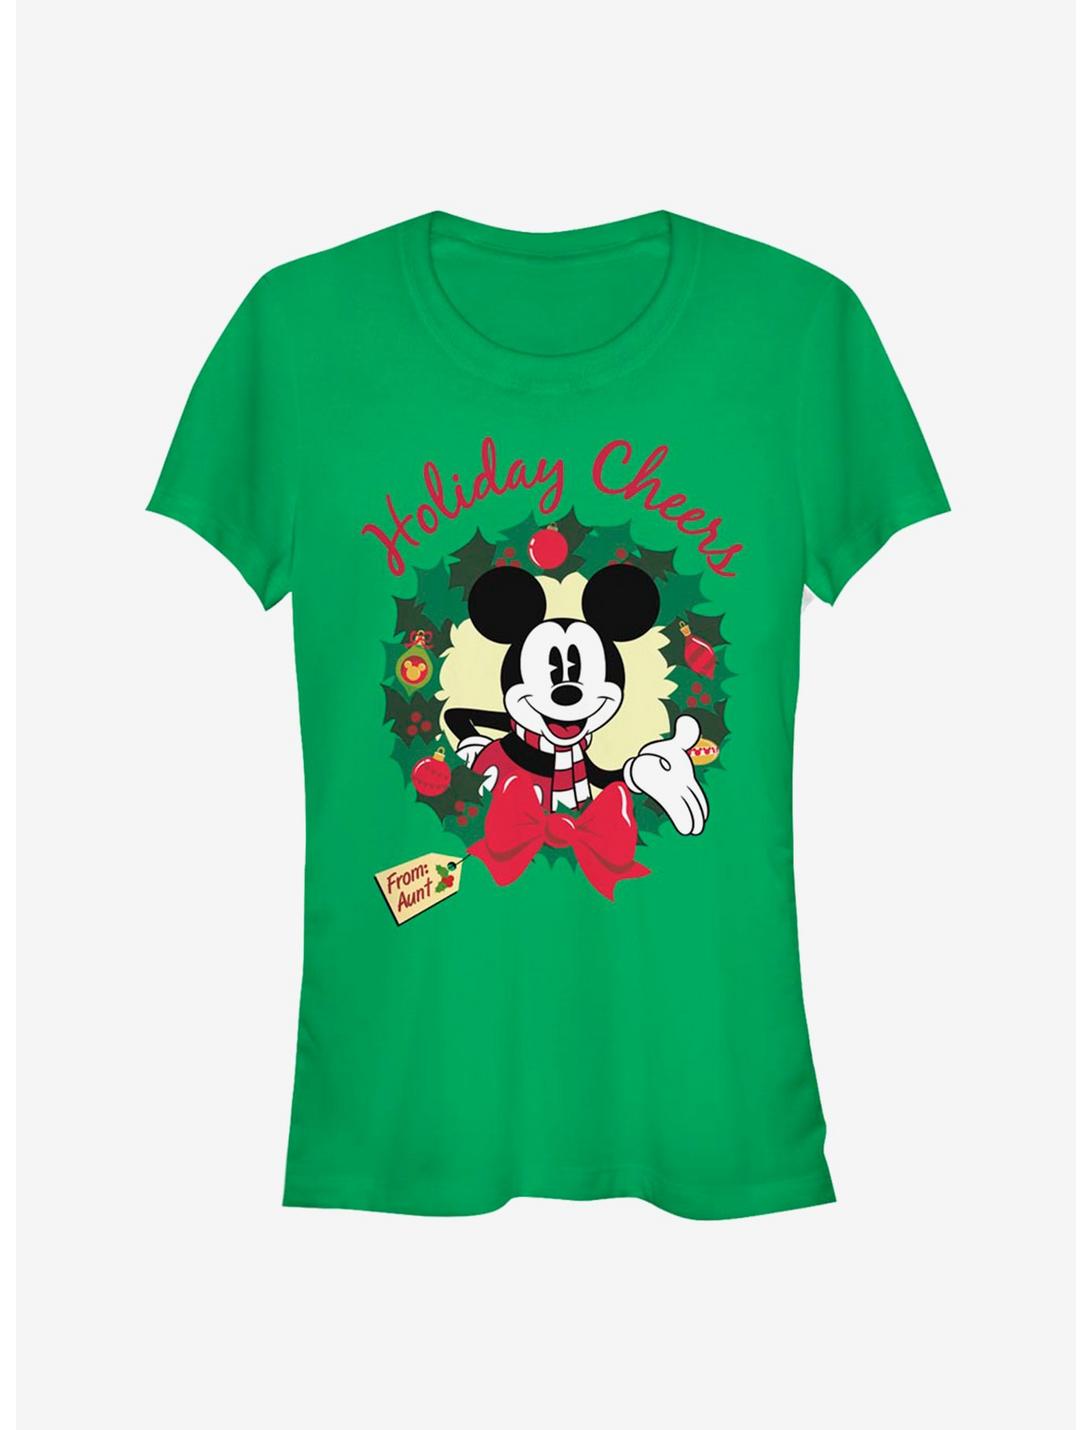 Disney Mickey Mouse Holiday Cheers From Aunt Classic Girls T-Shirt, KELLY, hi-res